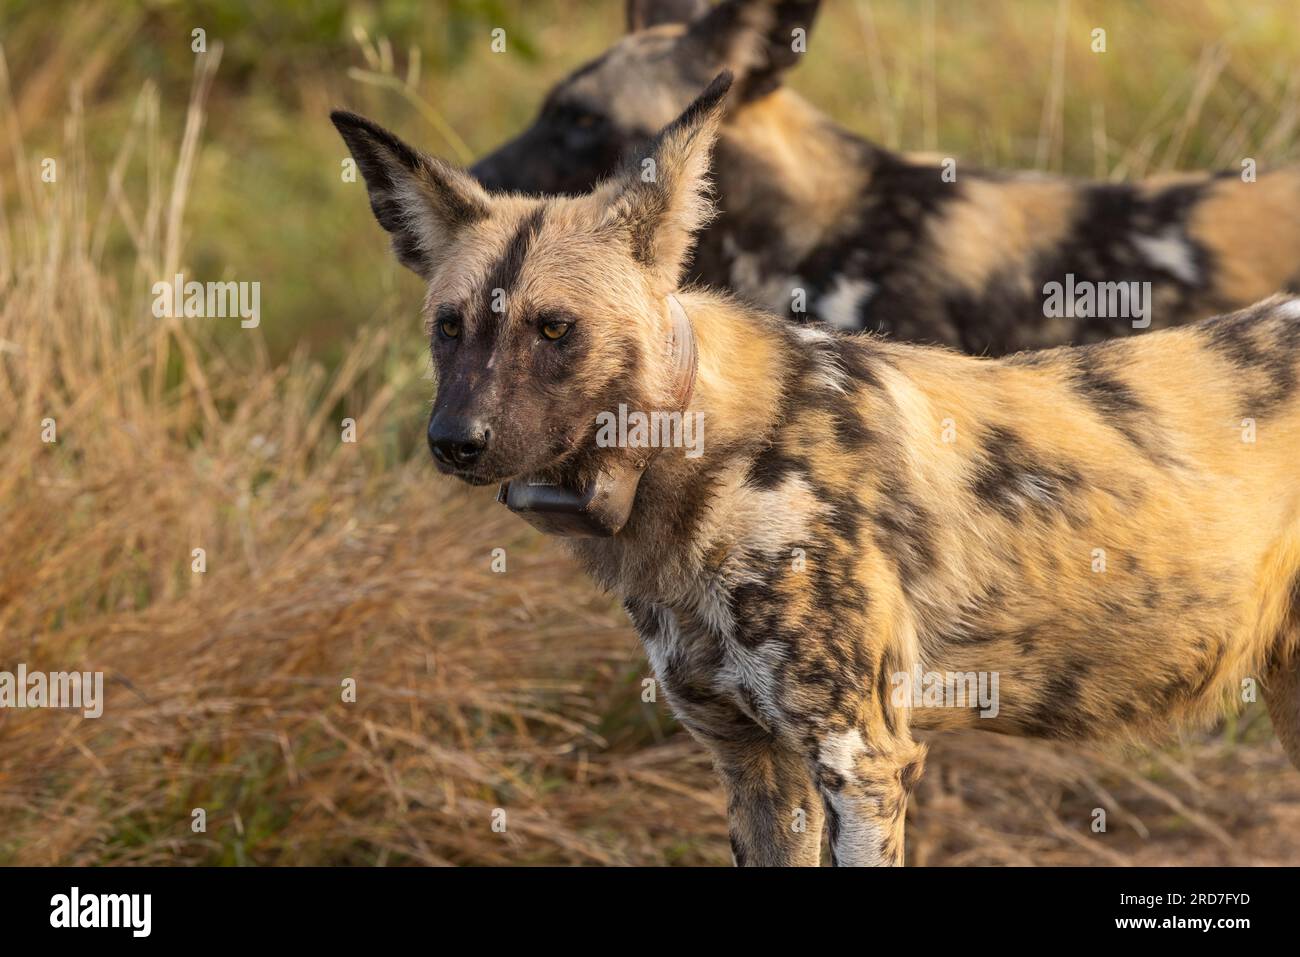 A close up view of an African wild dog with a tracking collar on near the Phalaborwa gate in the Kruger National Park, South Africa Stock Photo